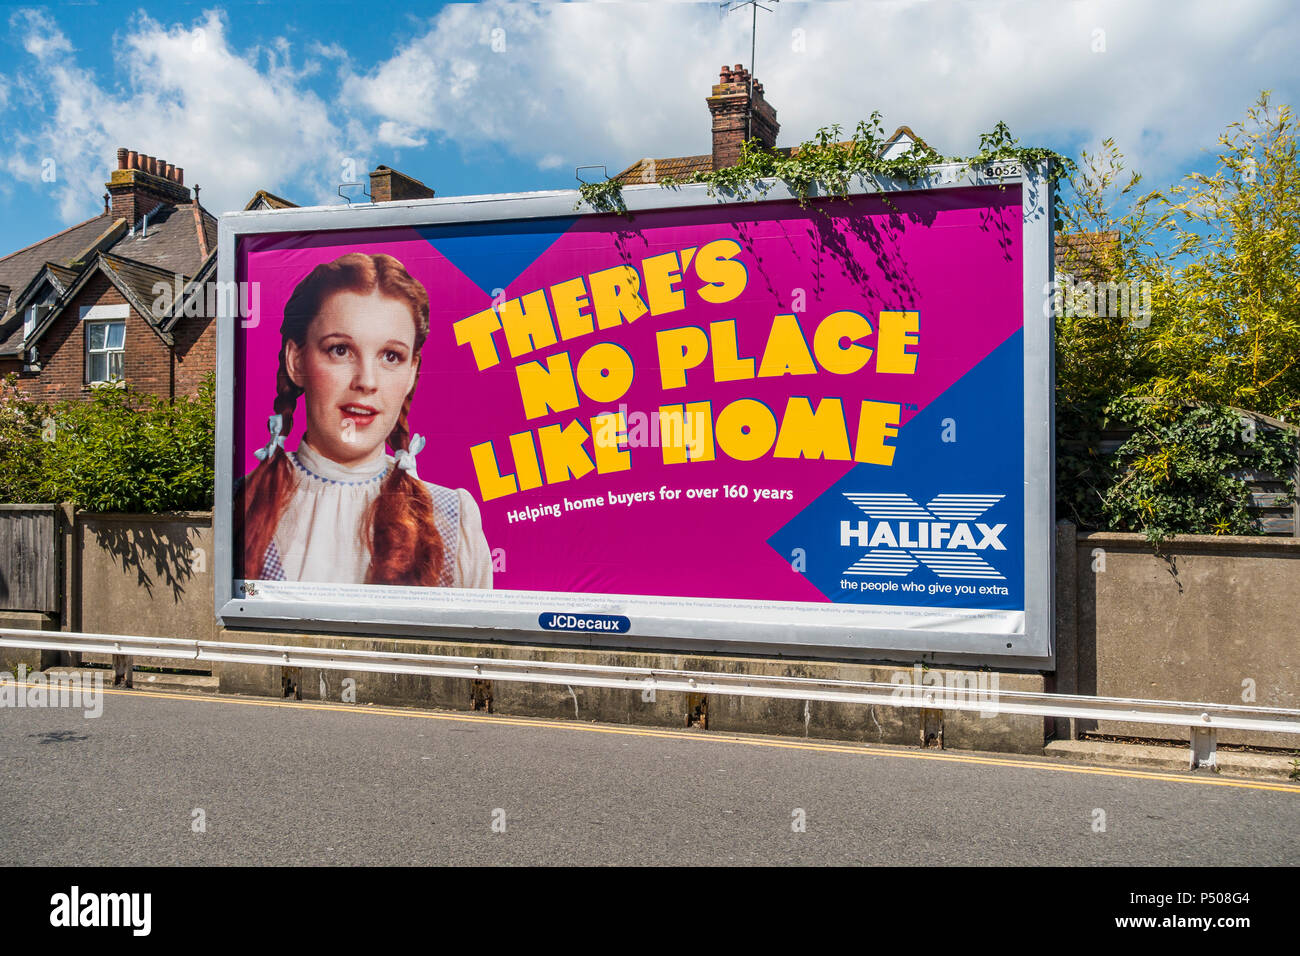 Halifax Building Society,Advertising Hoarding,There's No Place Like Home, Stock Photo